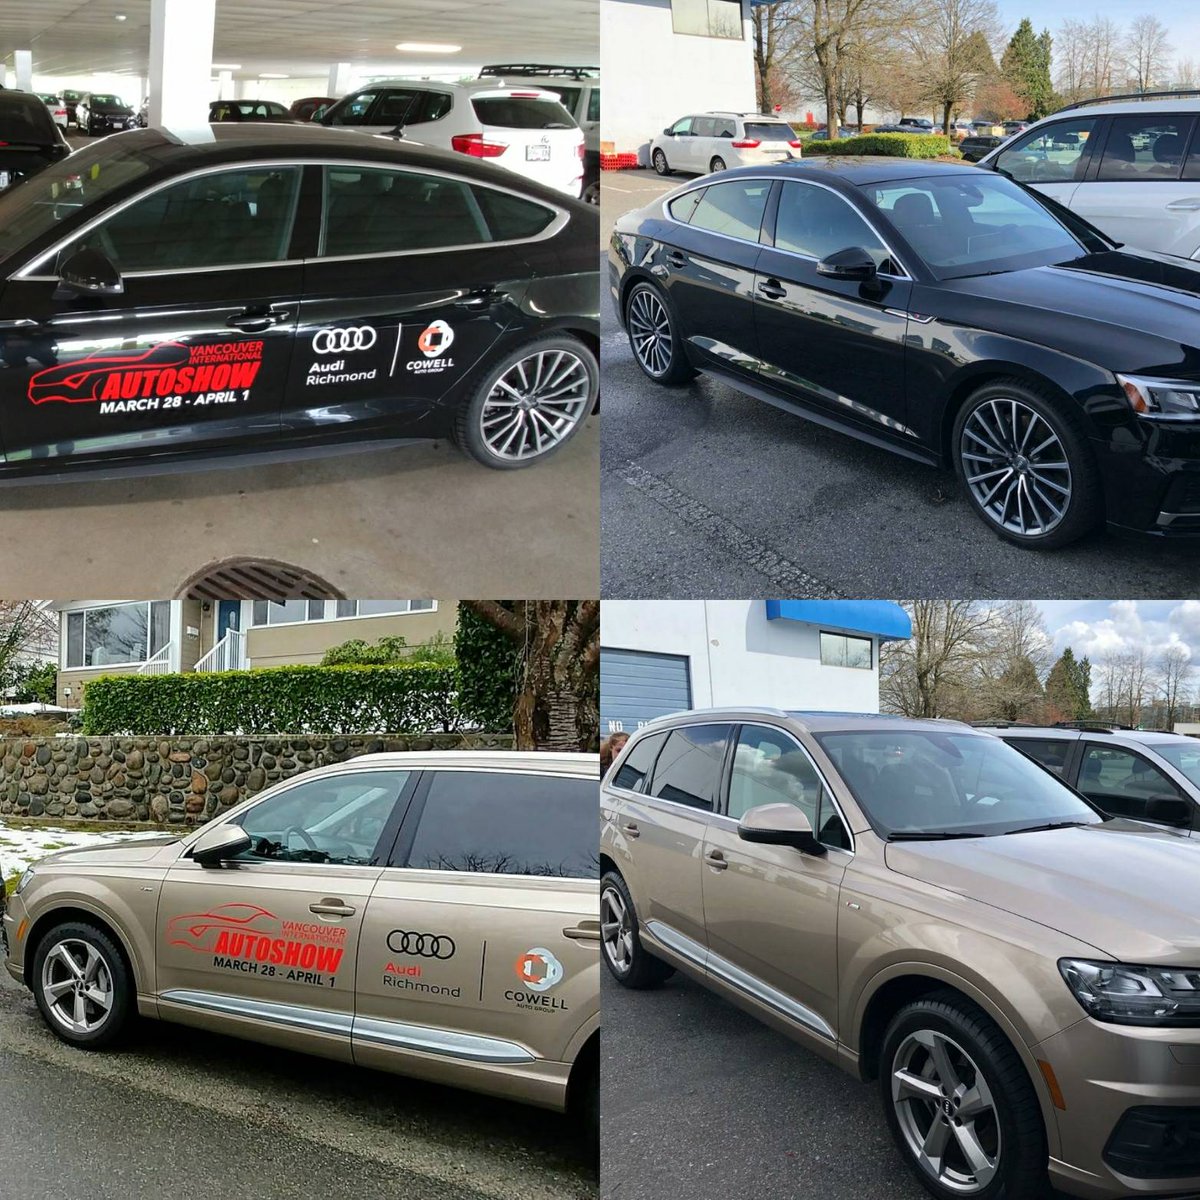 The pre and post #vanautoshow18  #RollingBillboards. Thanks to One Classic Auto Chemical Guys® for getting them all cleaned! @cowellautogroup @Audirichmond